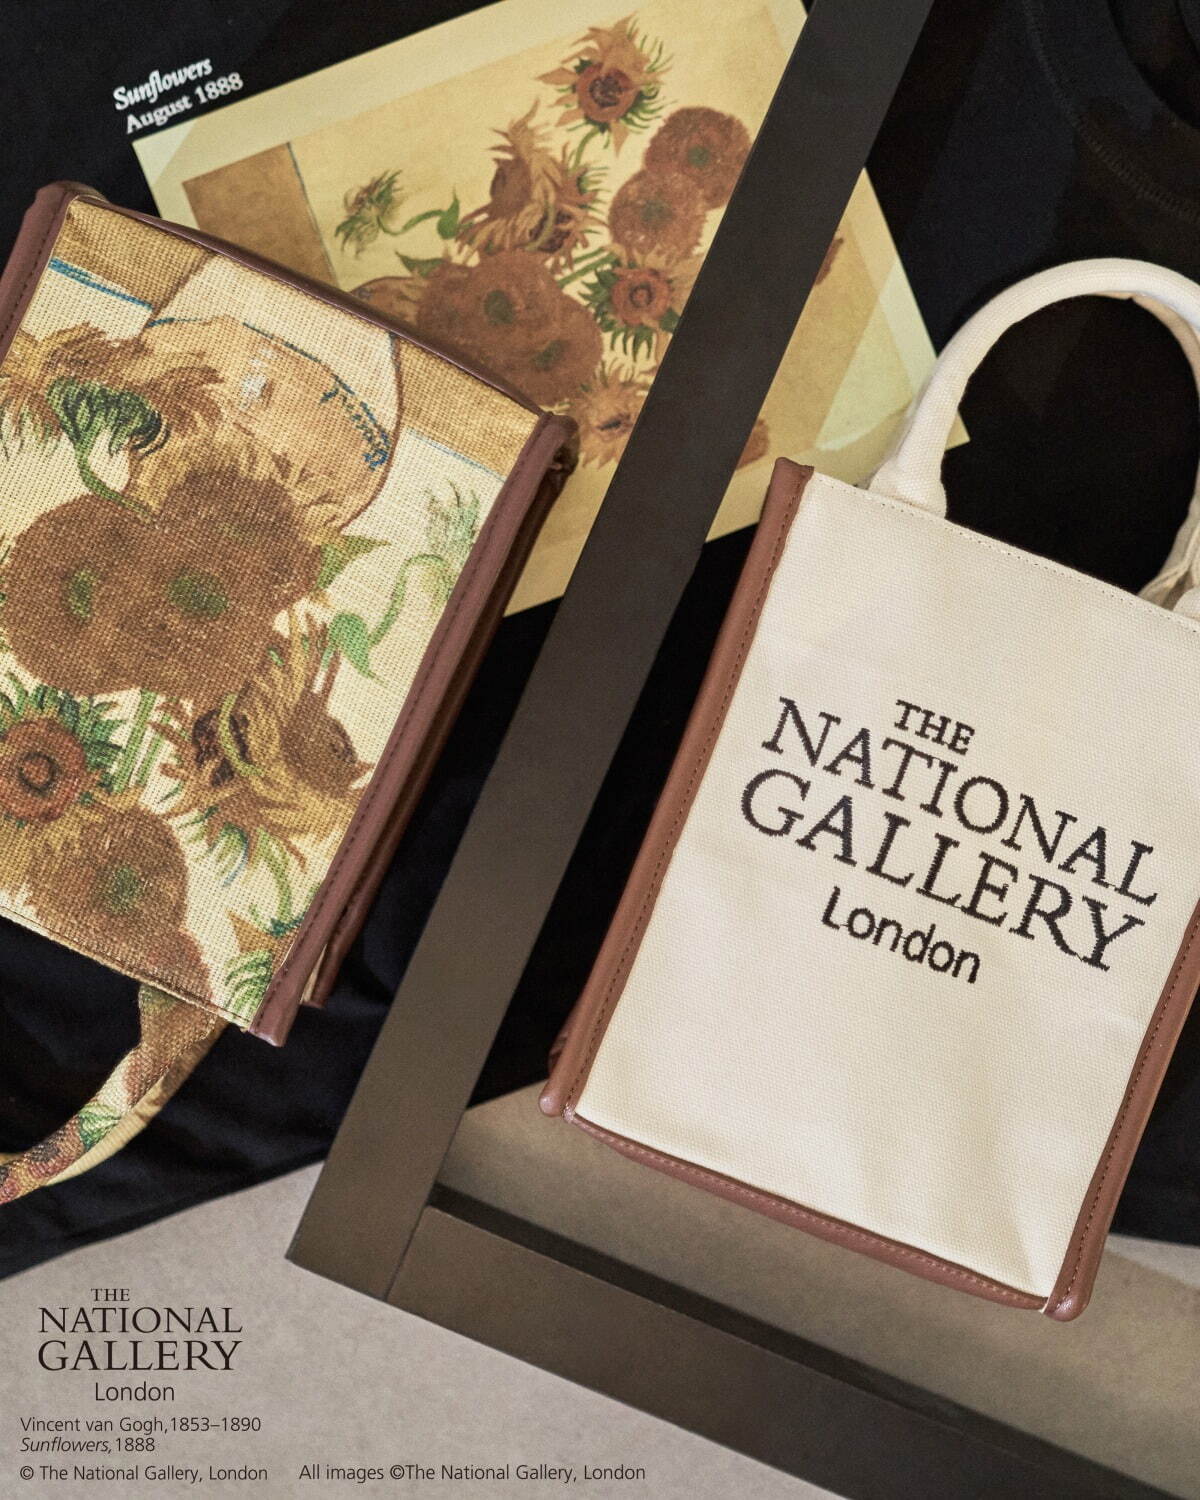 【The National Gallery, London】バッグ 11,880円、プリントTシャツ 6,930円